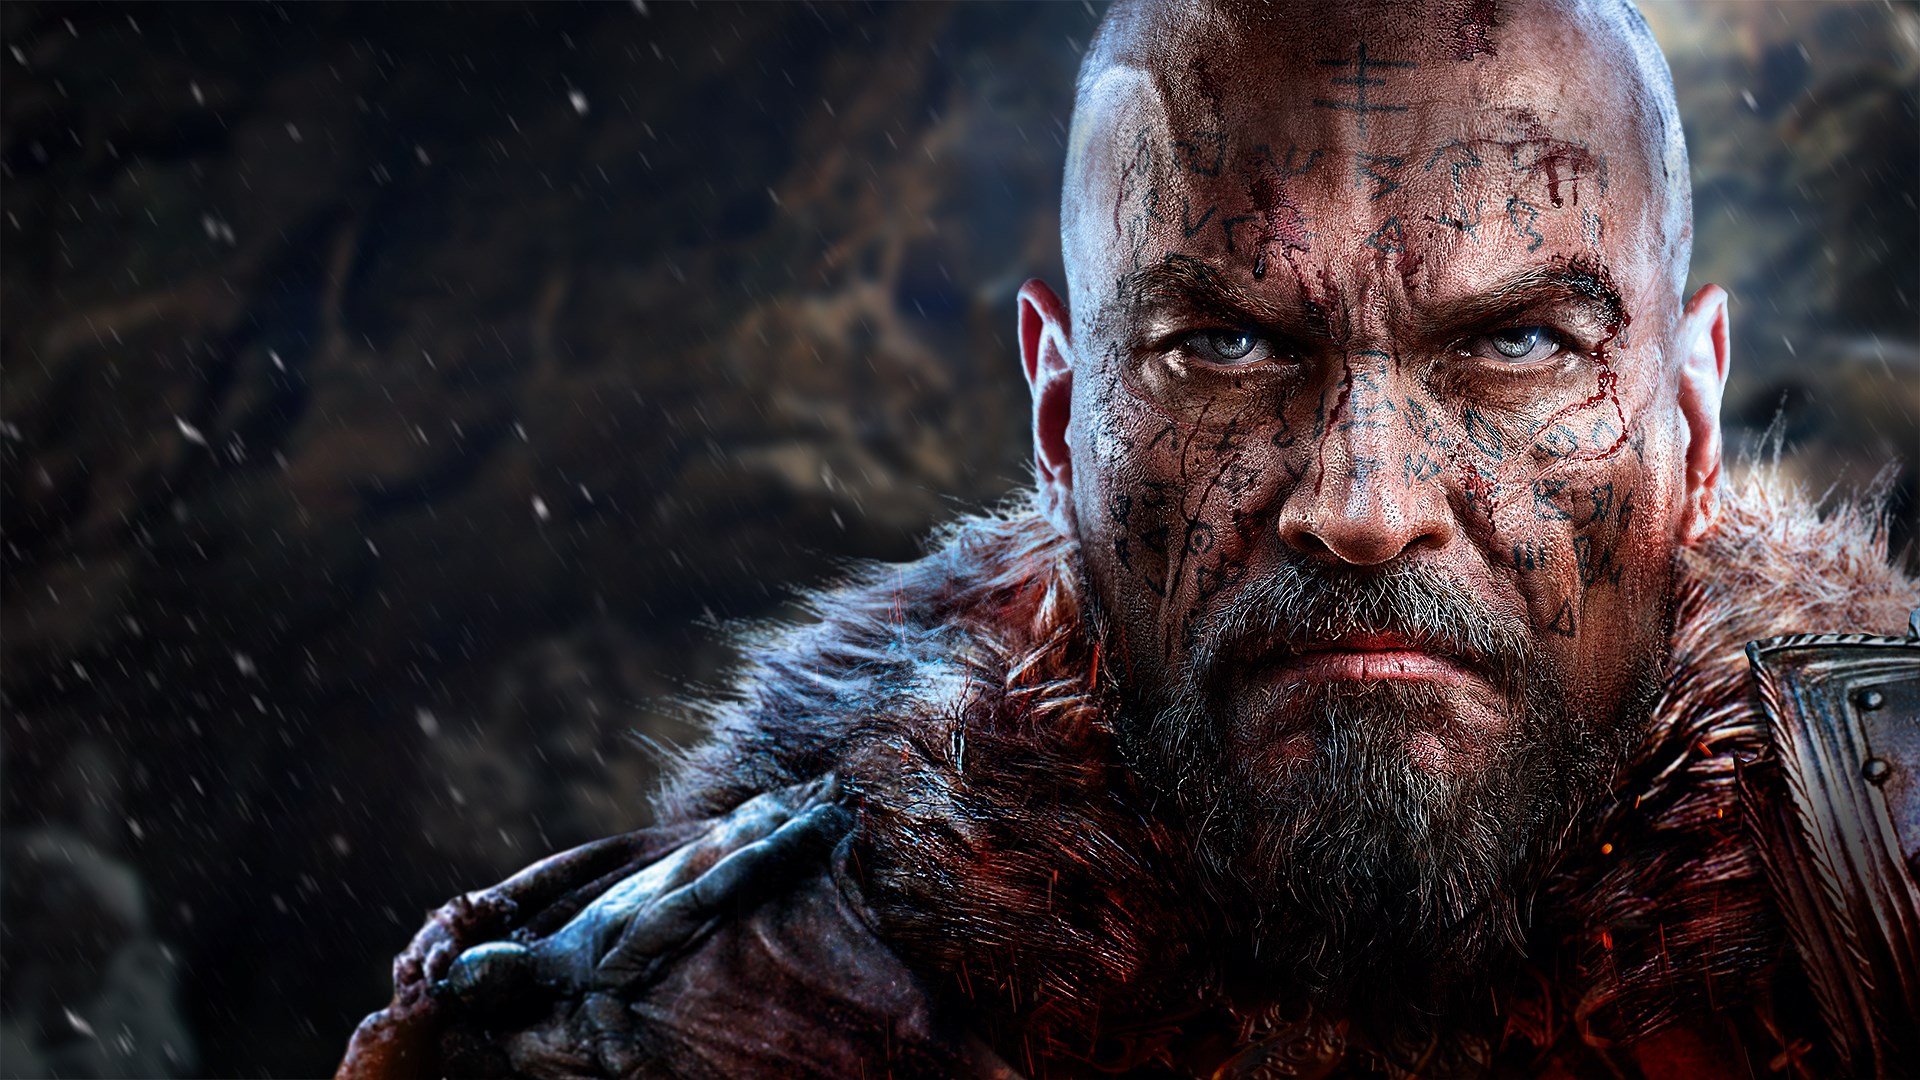 Lords of the Fallen Stuttering on PC Steam because of the graphics, optimization, files or pc not meeting minimum requirements.